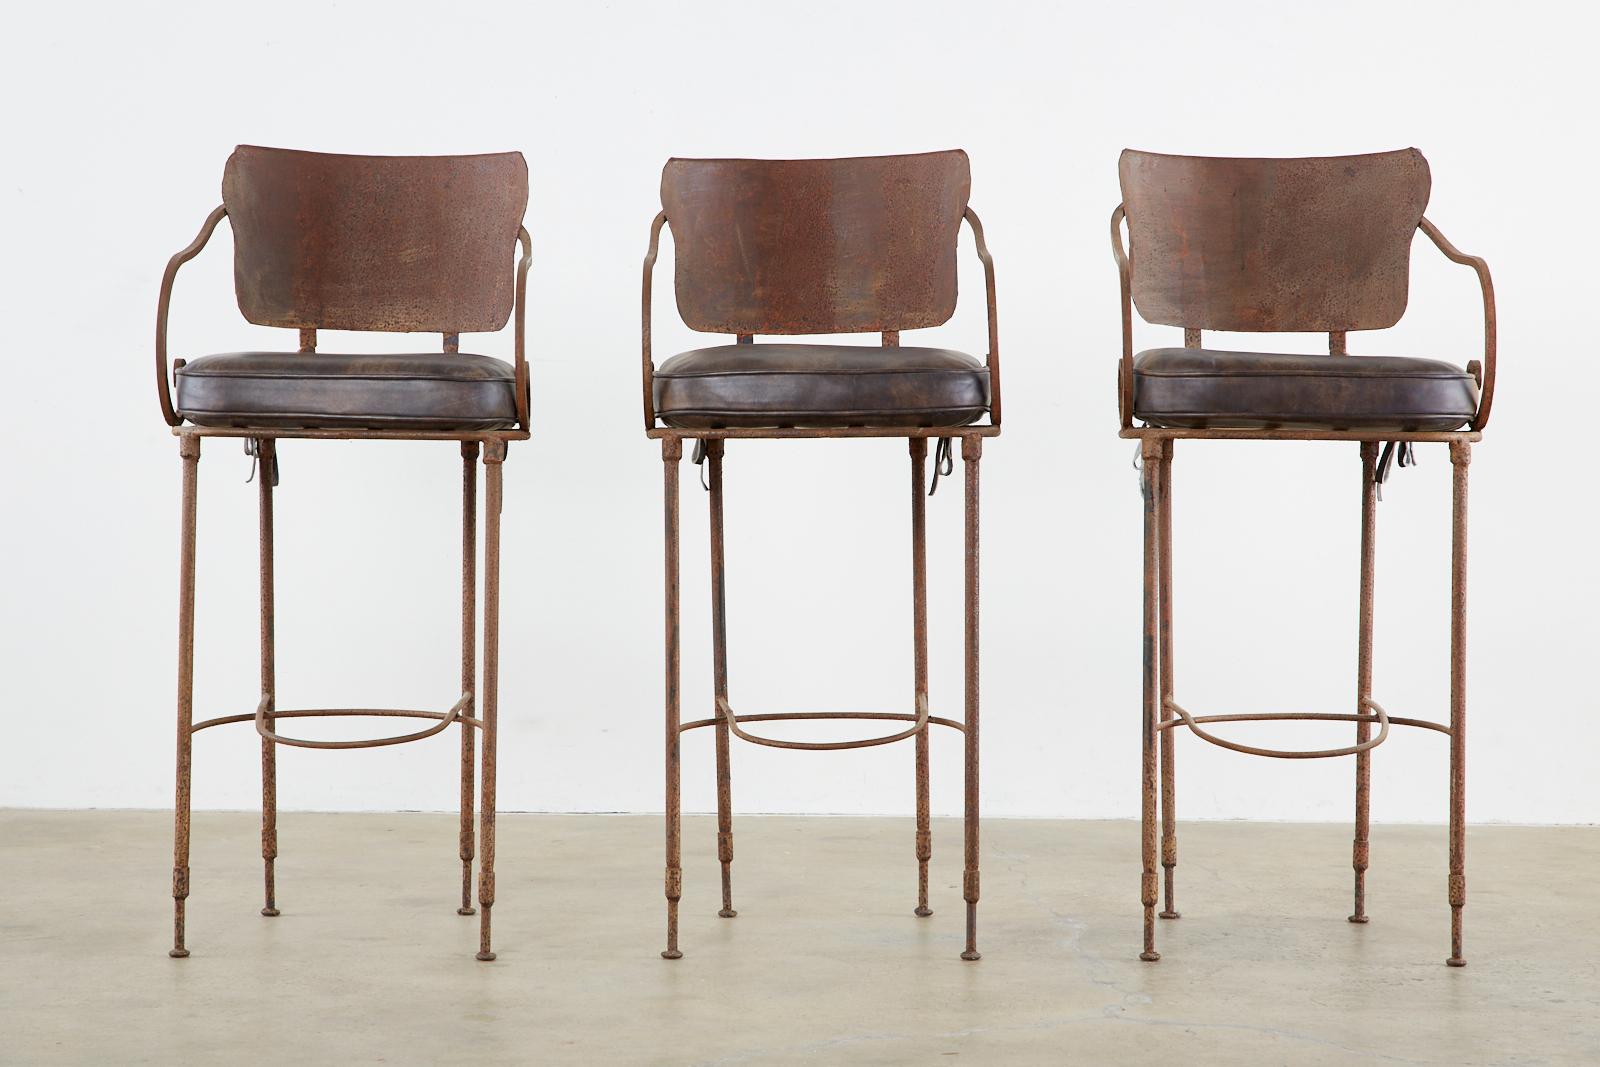 Rustic set of three iron and leather barstools hand forged by Arhaus. Each chair a masterpiece with a beautifully patinated iron finish. Topped with fitted leather seat cushions each stool is very heavy and sturdy with a unique handcrafted finish.